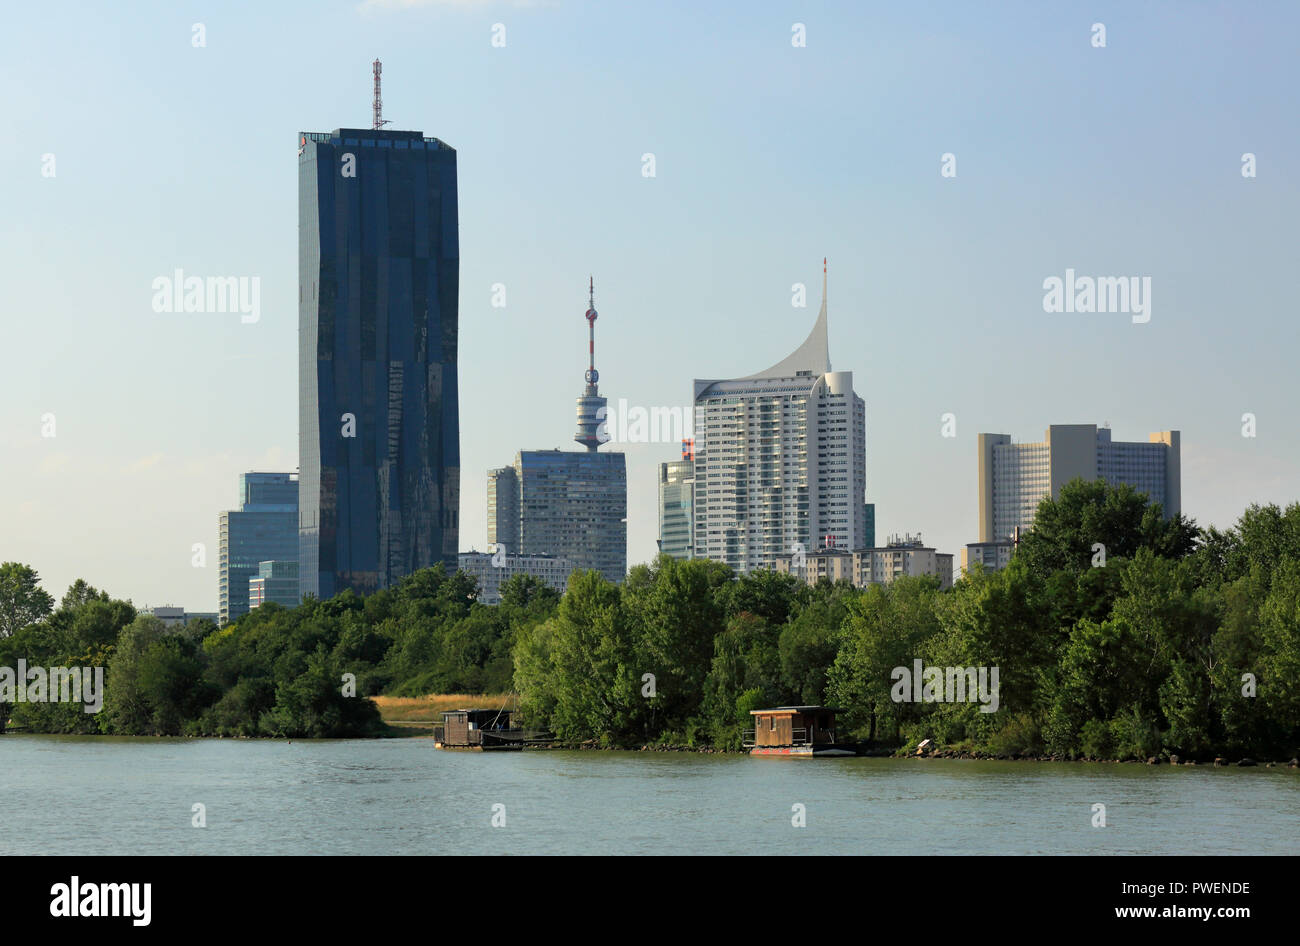 Austria, A-Vienna, Danube, Federal Capital, skyline of the Donau City, f.l.t.r. Ares Tower, Commercial Tower, DC Tower 1, Commercial Tower, skyscraper, Mischek Tower, apartment tower, Donau Tower, highrise Neue Donau, apartment tower, UNO City with VIC Vienna International Centre and Austria Center Vienna, river landscape, Danube landscape, Danube promenade, Danube bank Stock Photo